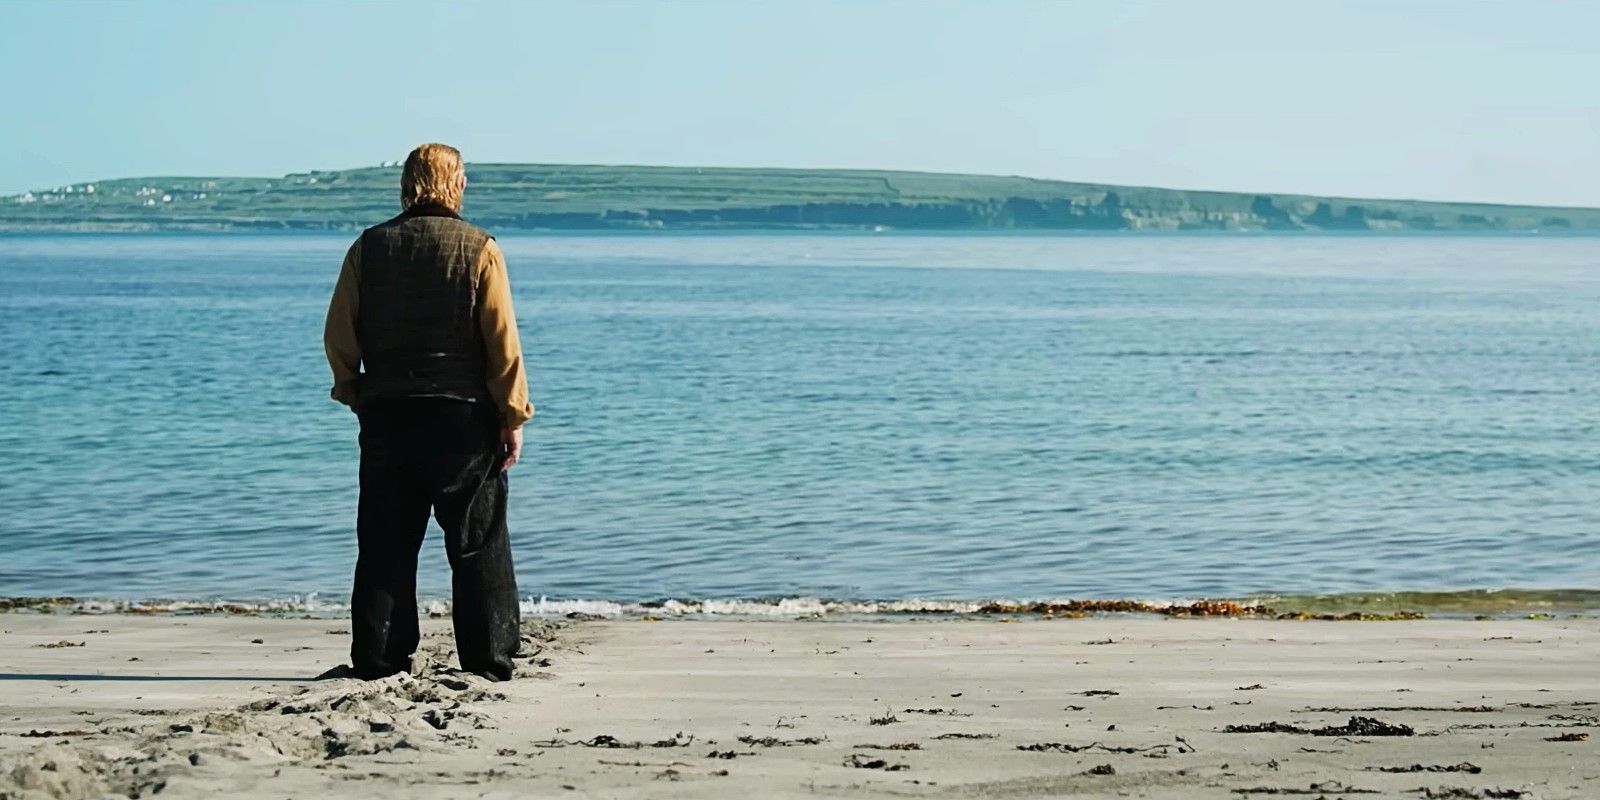 Brendan Gleeson as Colm in The Banshees of Inisherin